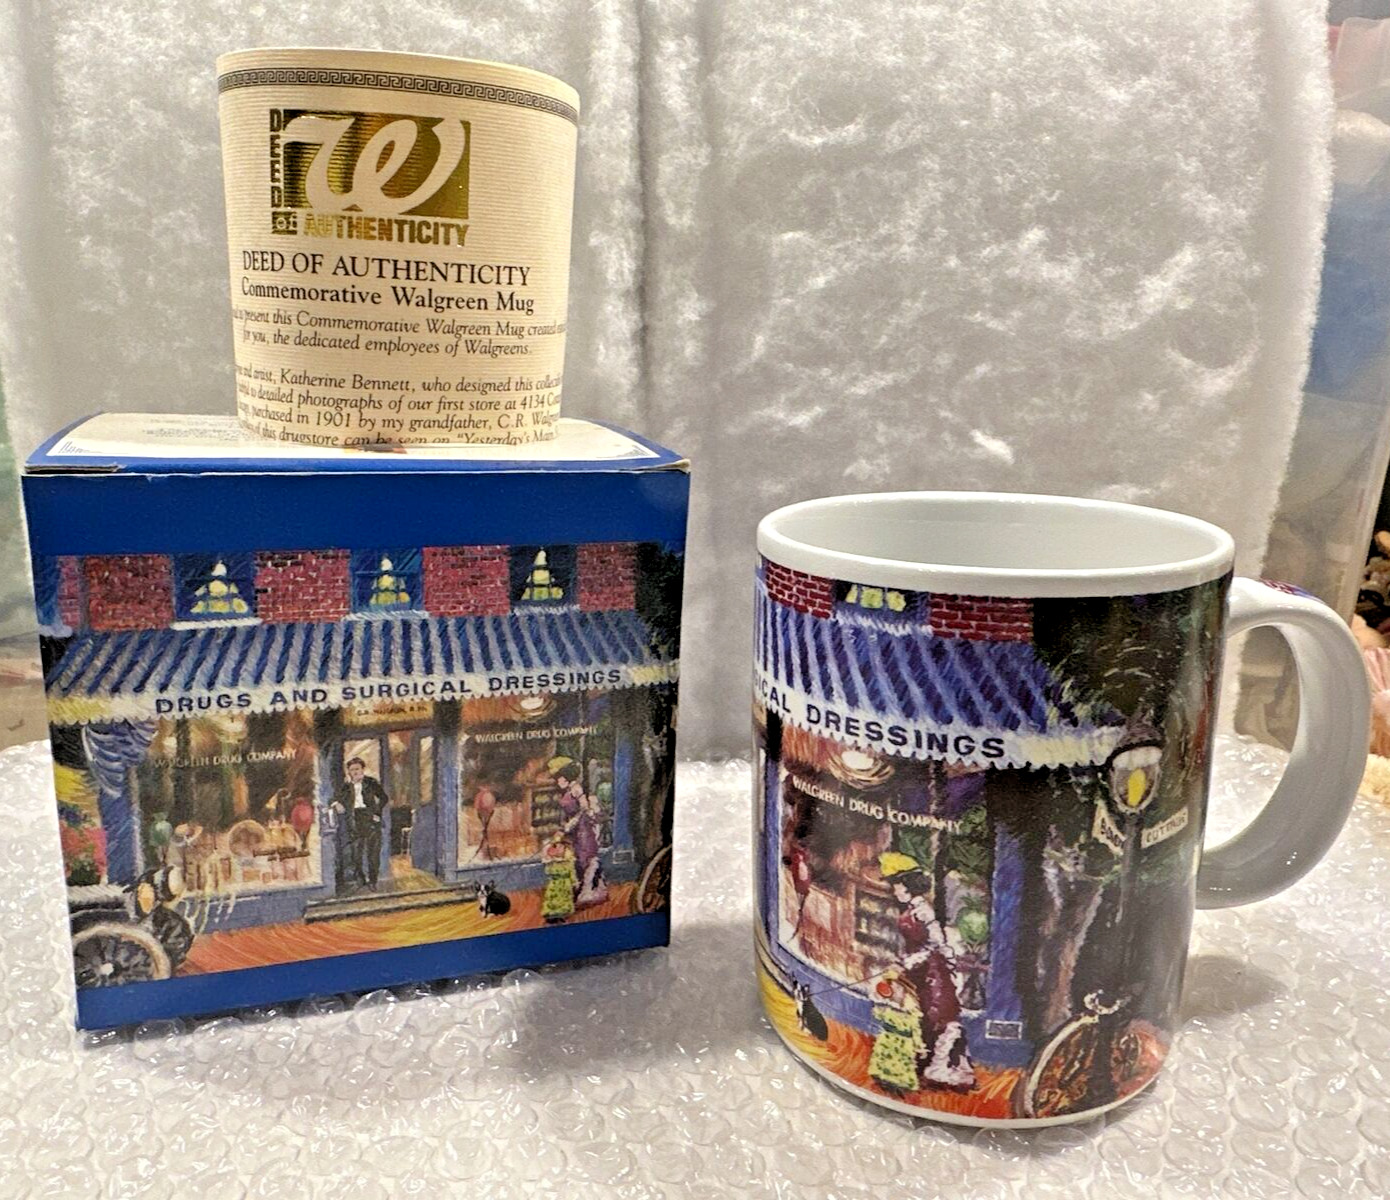 Vintage 1901 The First Walgreens Drugstore Commemorative Coffee Mug - New In Box